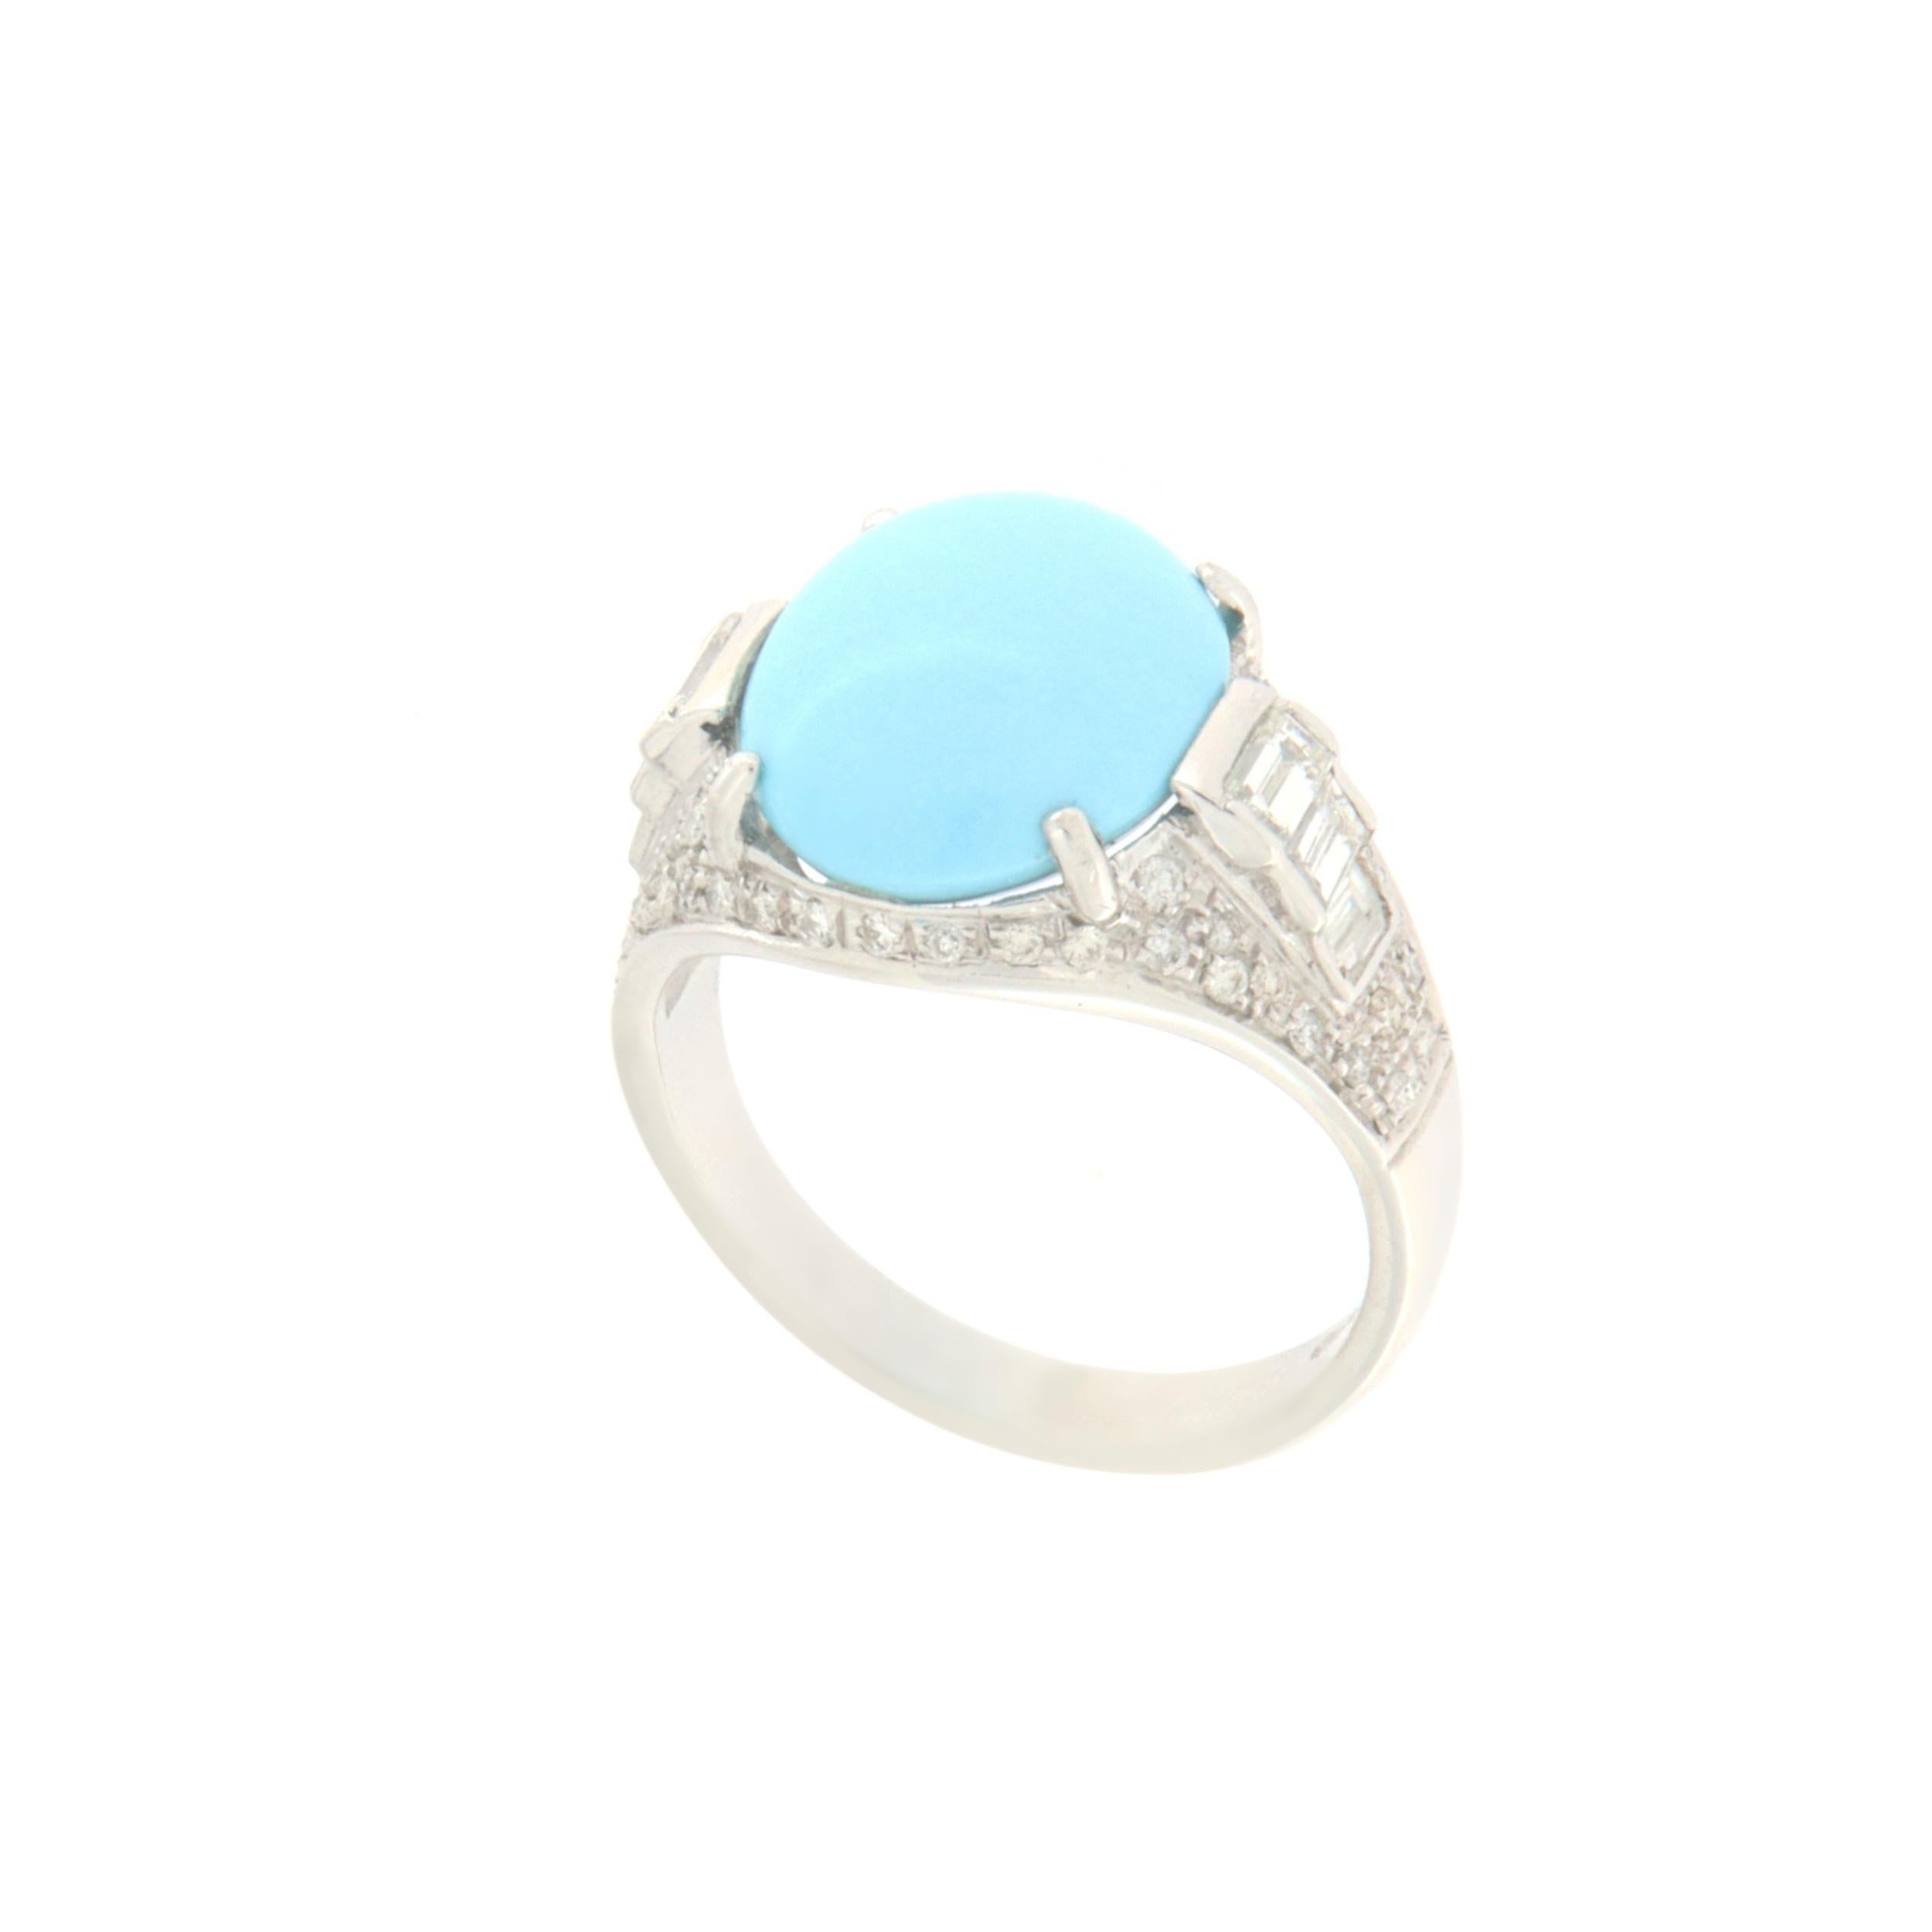 Handcraft 18 karat white gold cocktail ring.Handmade by artisans assembled with turquoise and diamonds

Ring total weight 8.20 grams
Diamonds weight 0.31 karat
Turquoise weight 2 grams
Ring size 17.85 ita 8.35 Us
(all rings are can be resized)